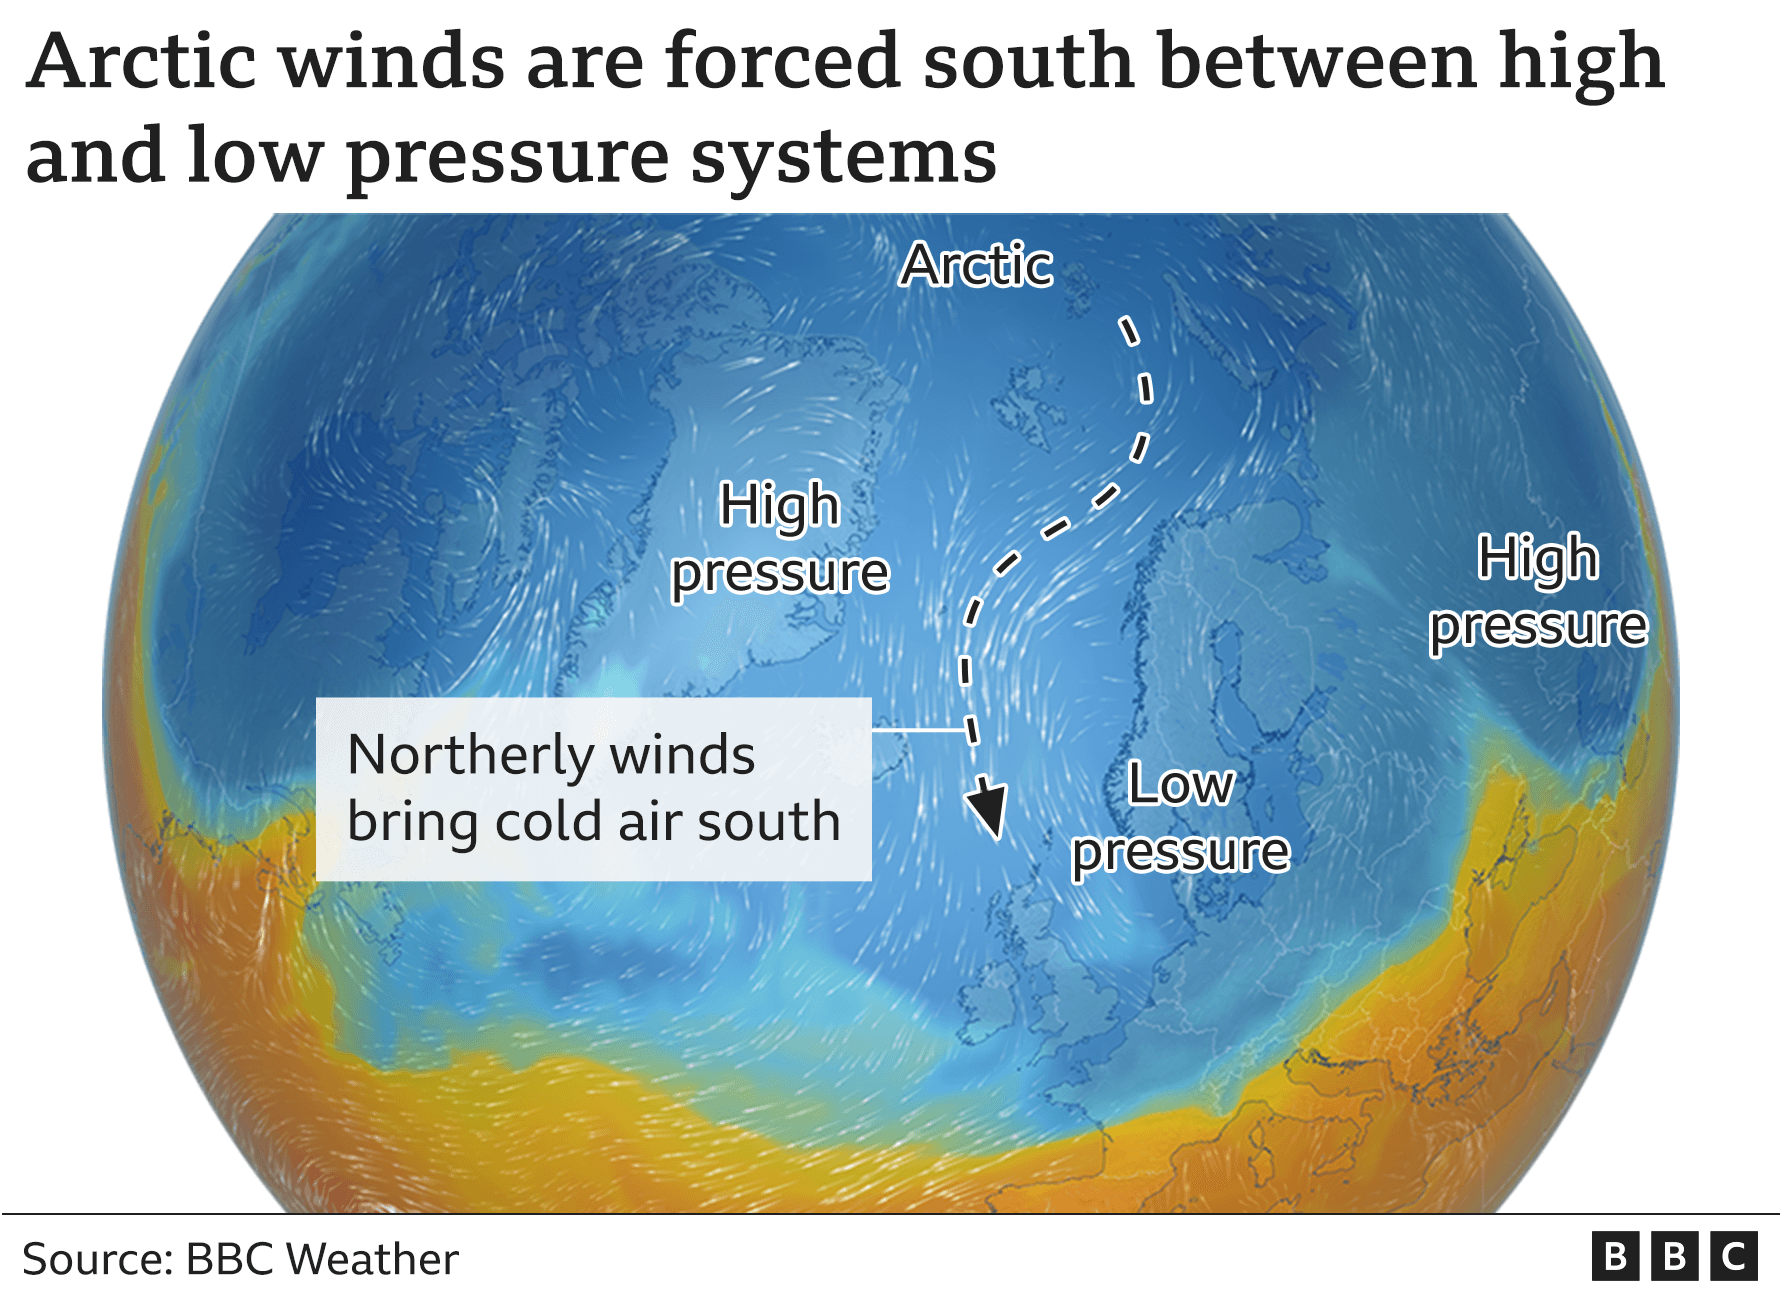 Graphic showing how Arctic winds are being forced south between high and low pressure systems